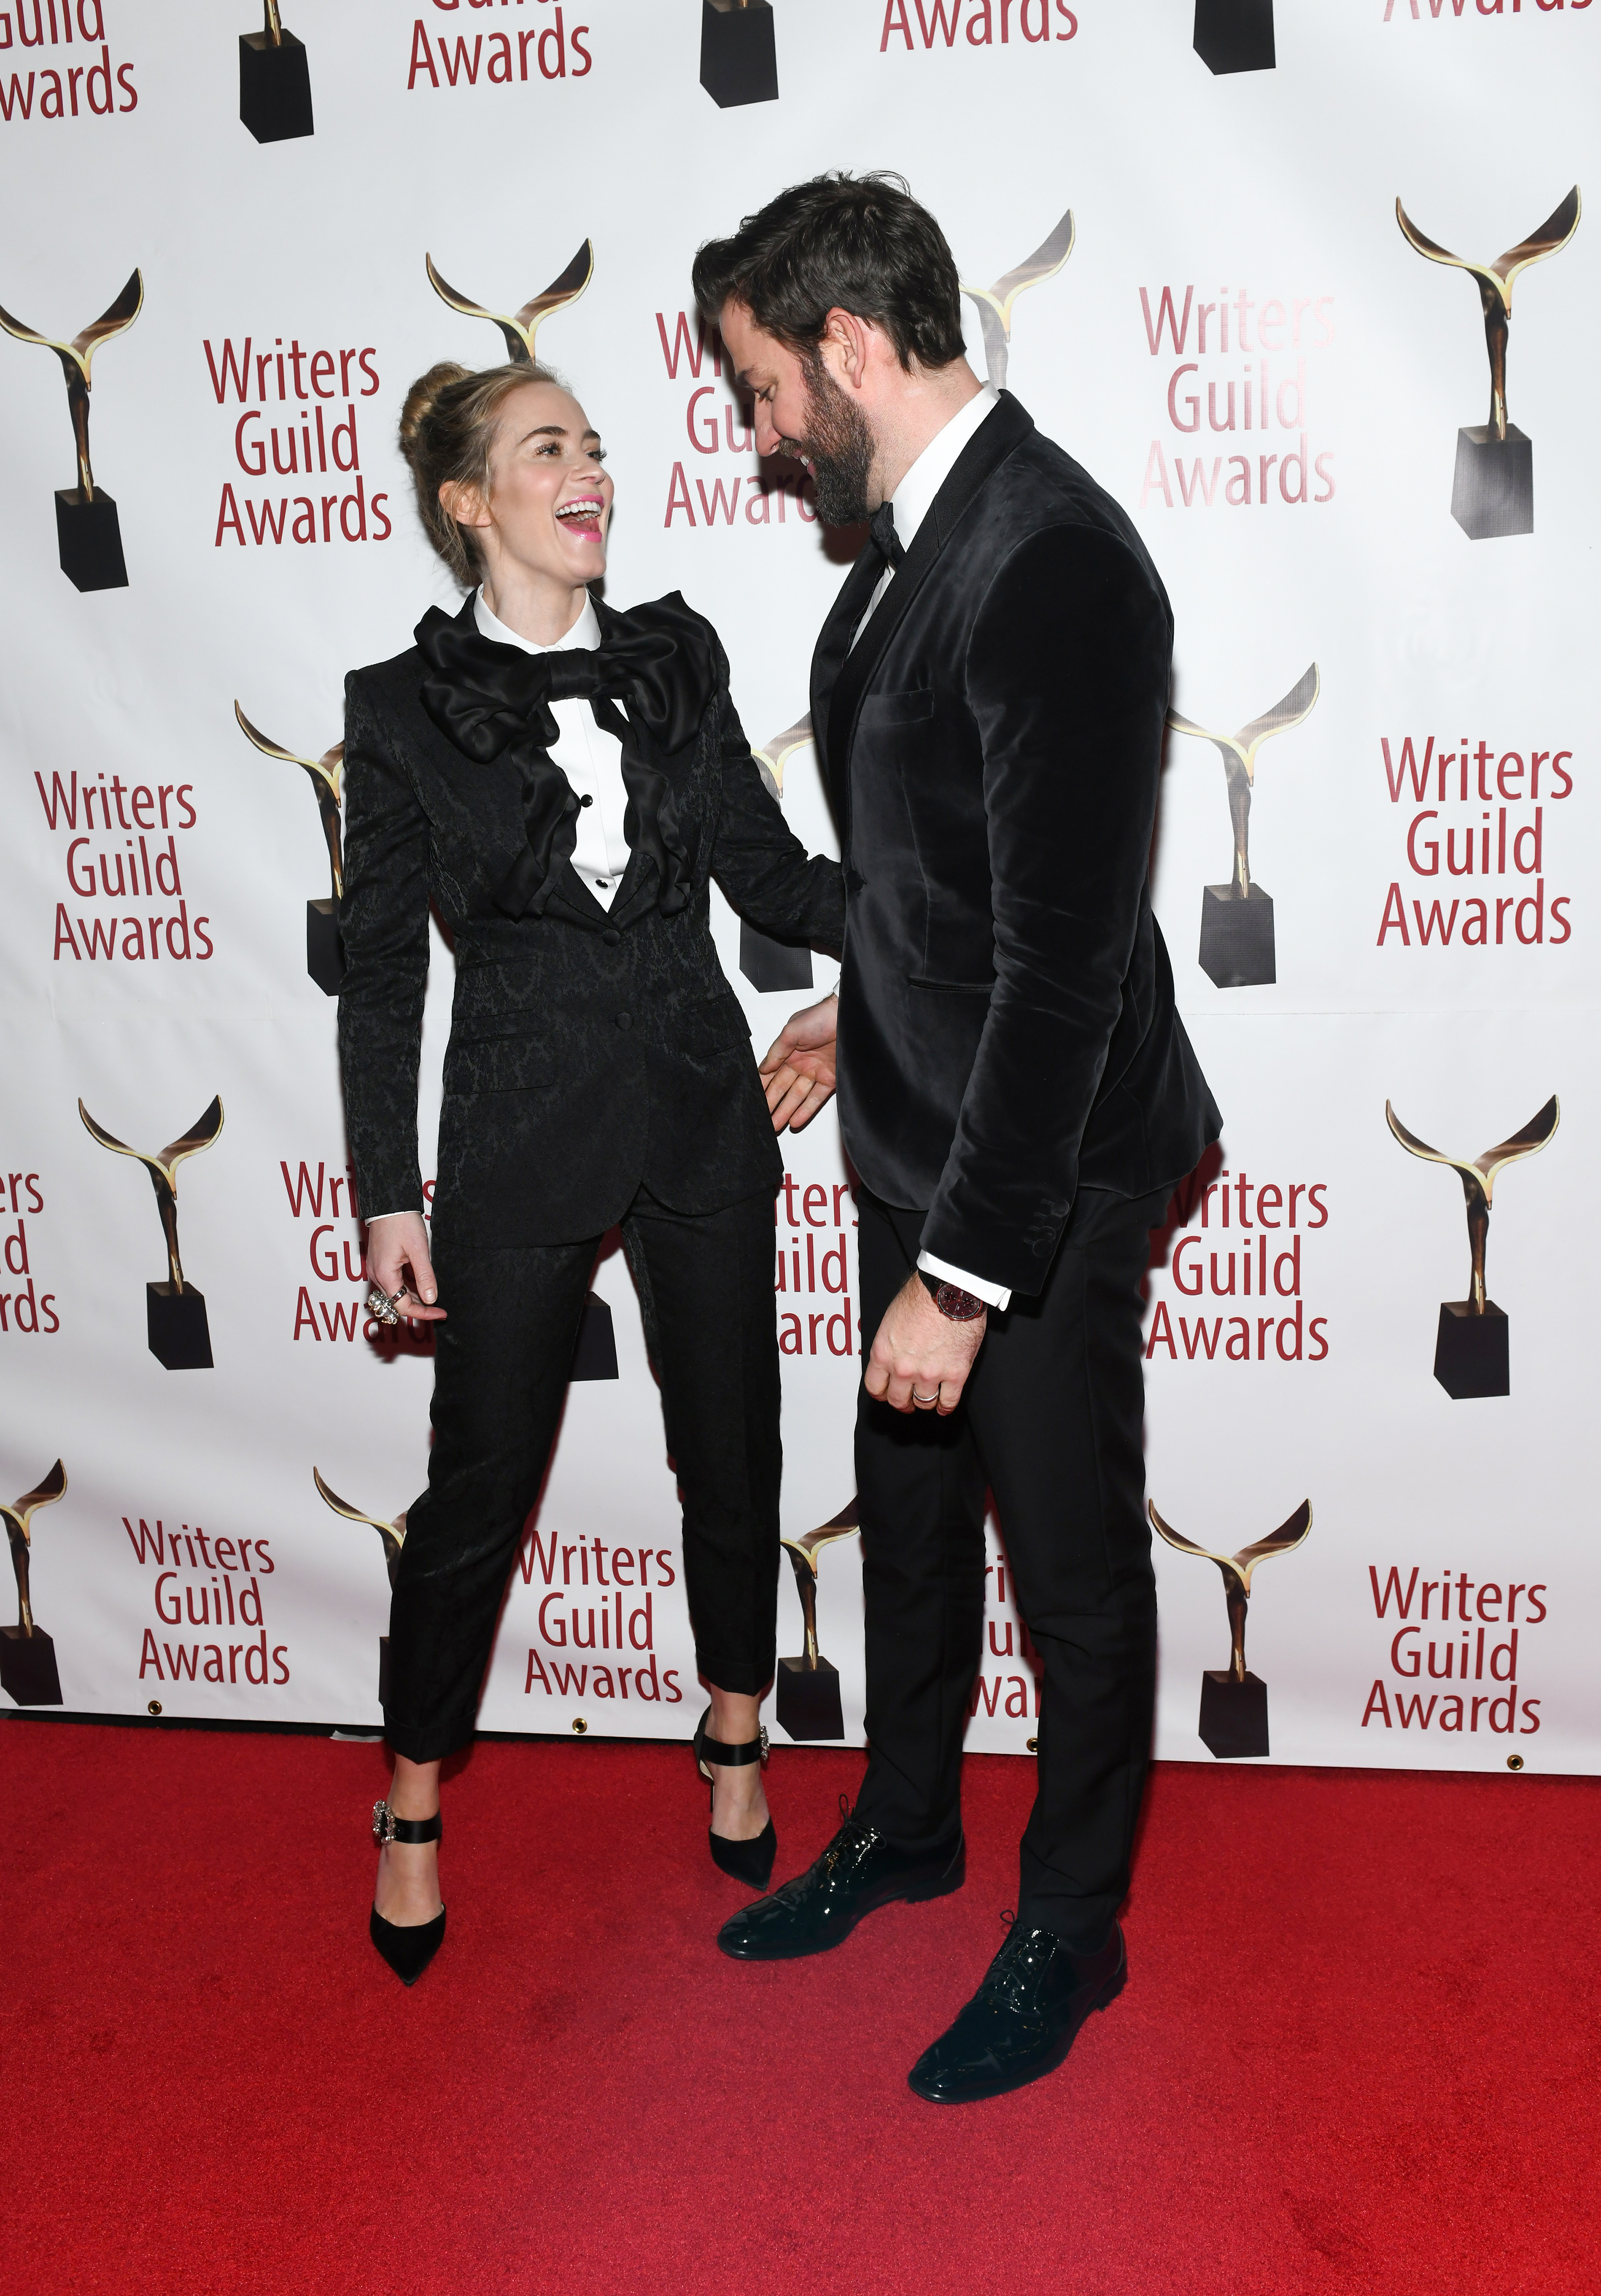 Emily Blunt and John Krasinski at the 71st Annual Writers Guild Awards in New York City, 2019 | Source: Getty Images